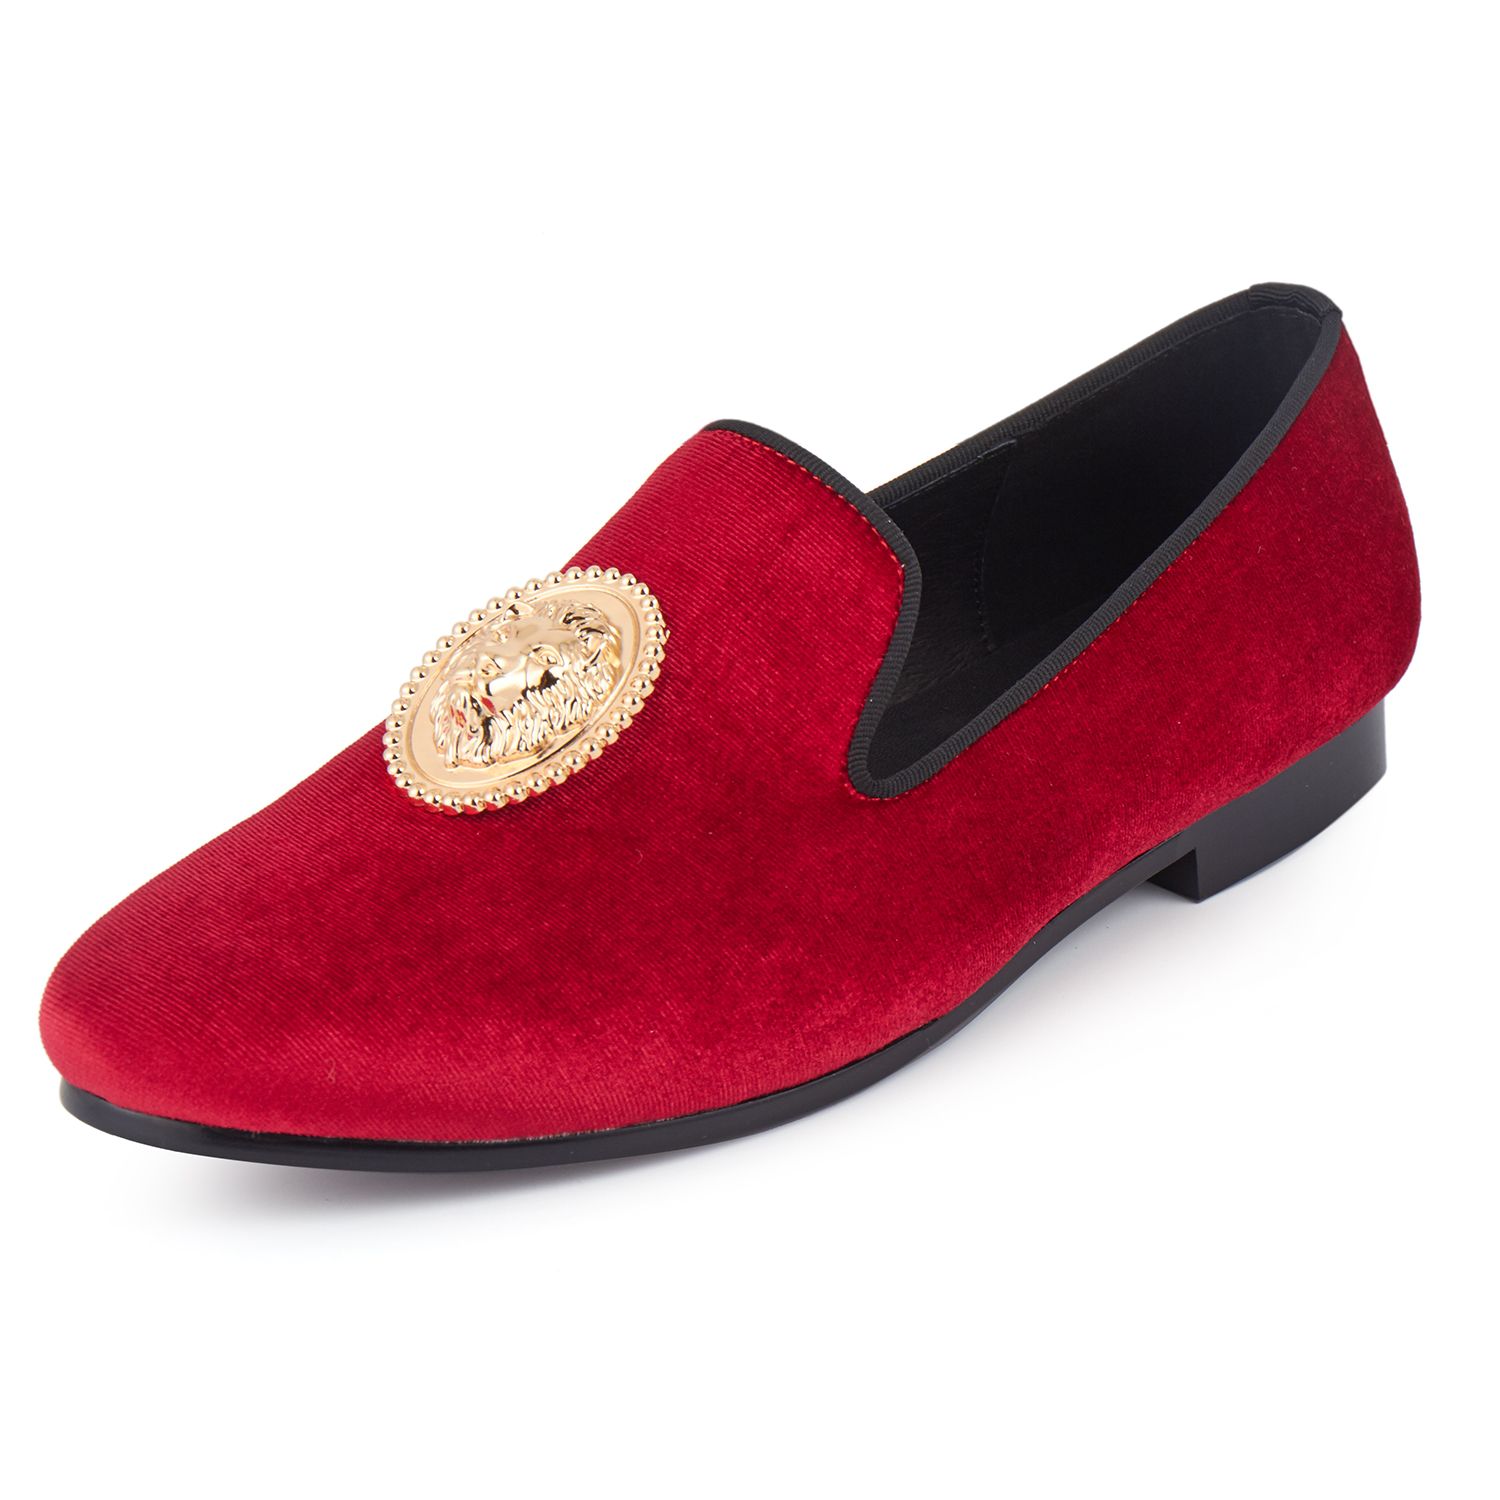 stacy adams red loafers cheap online